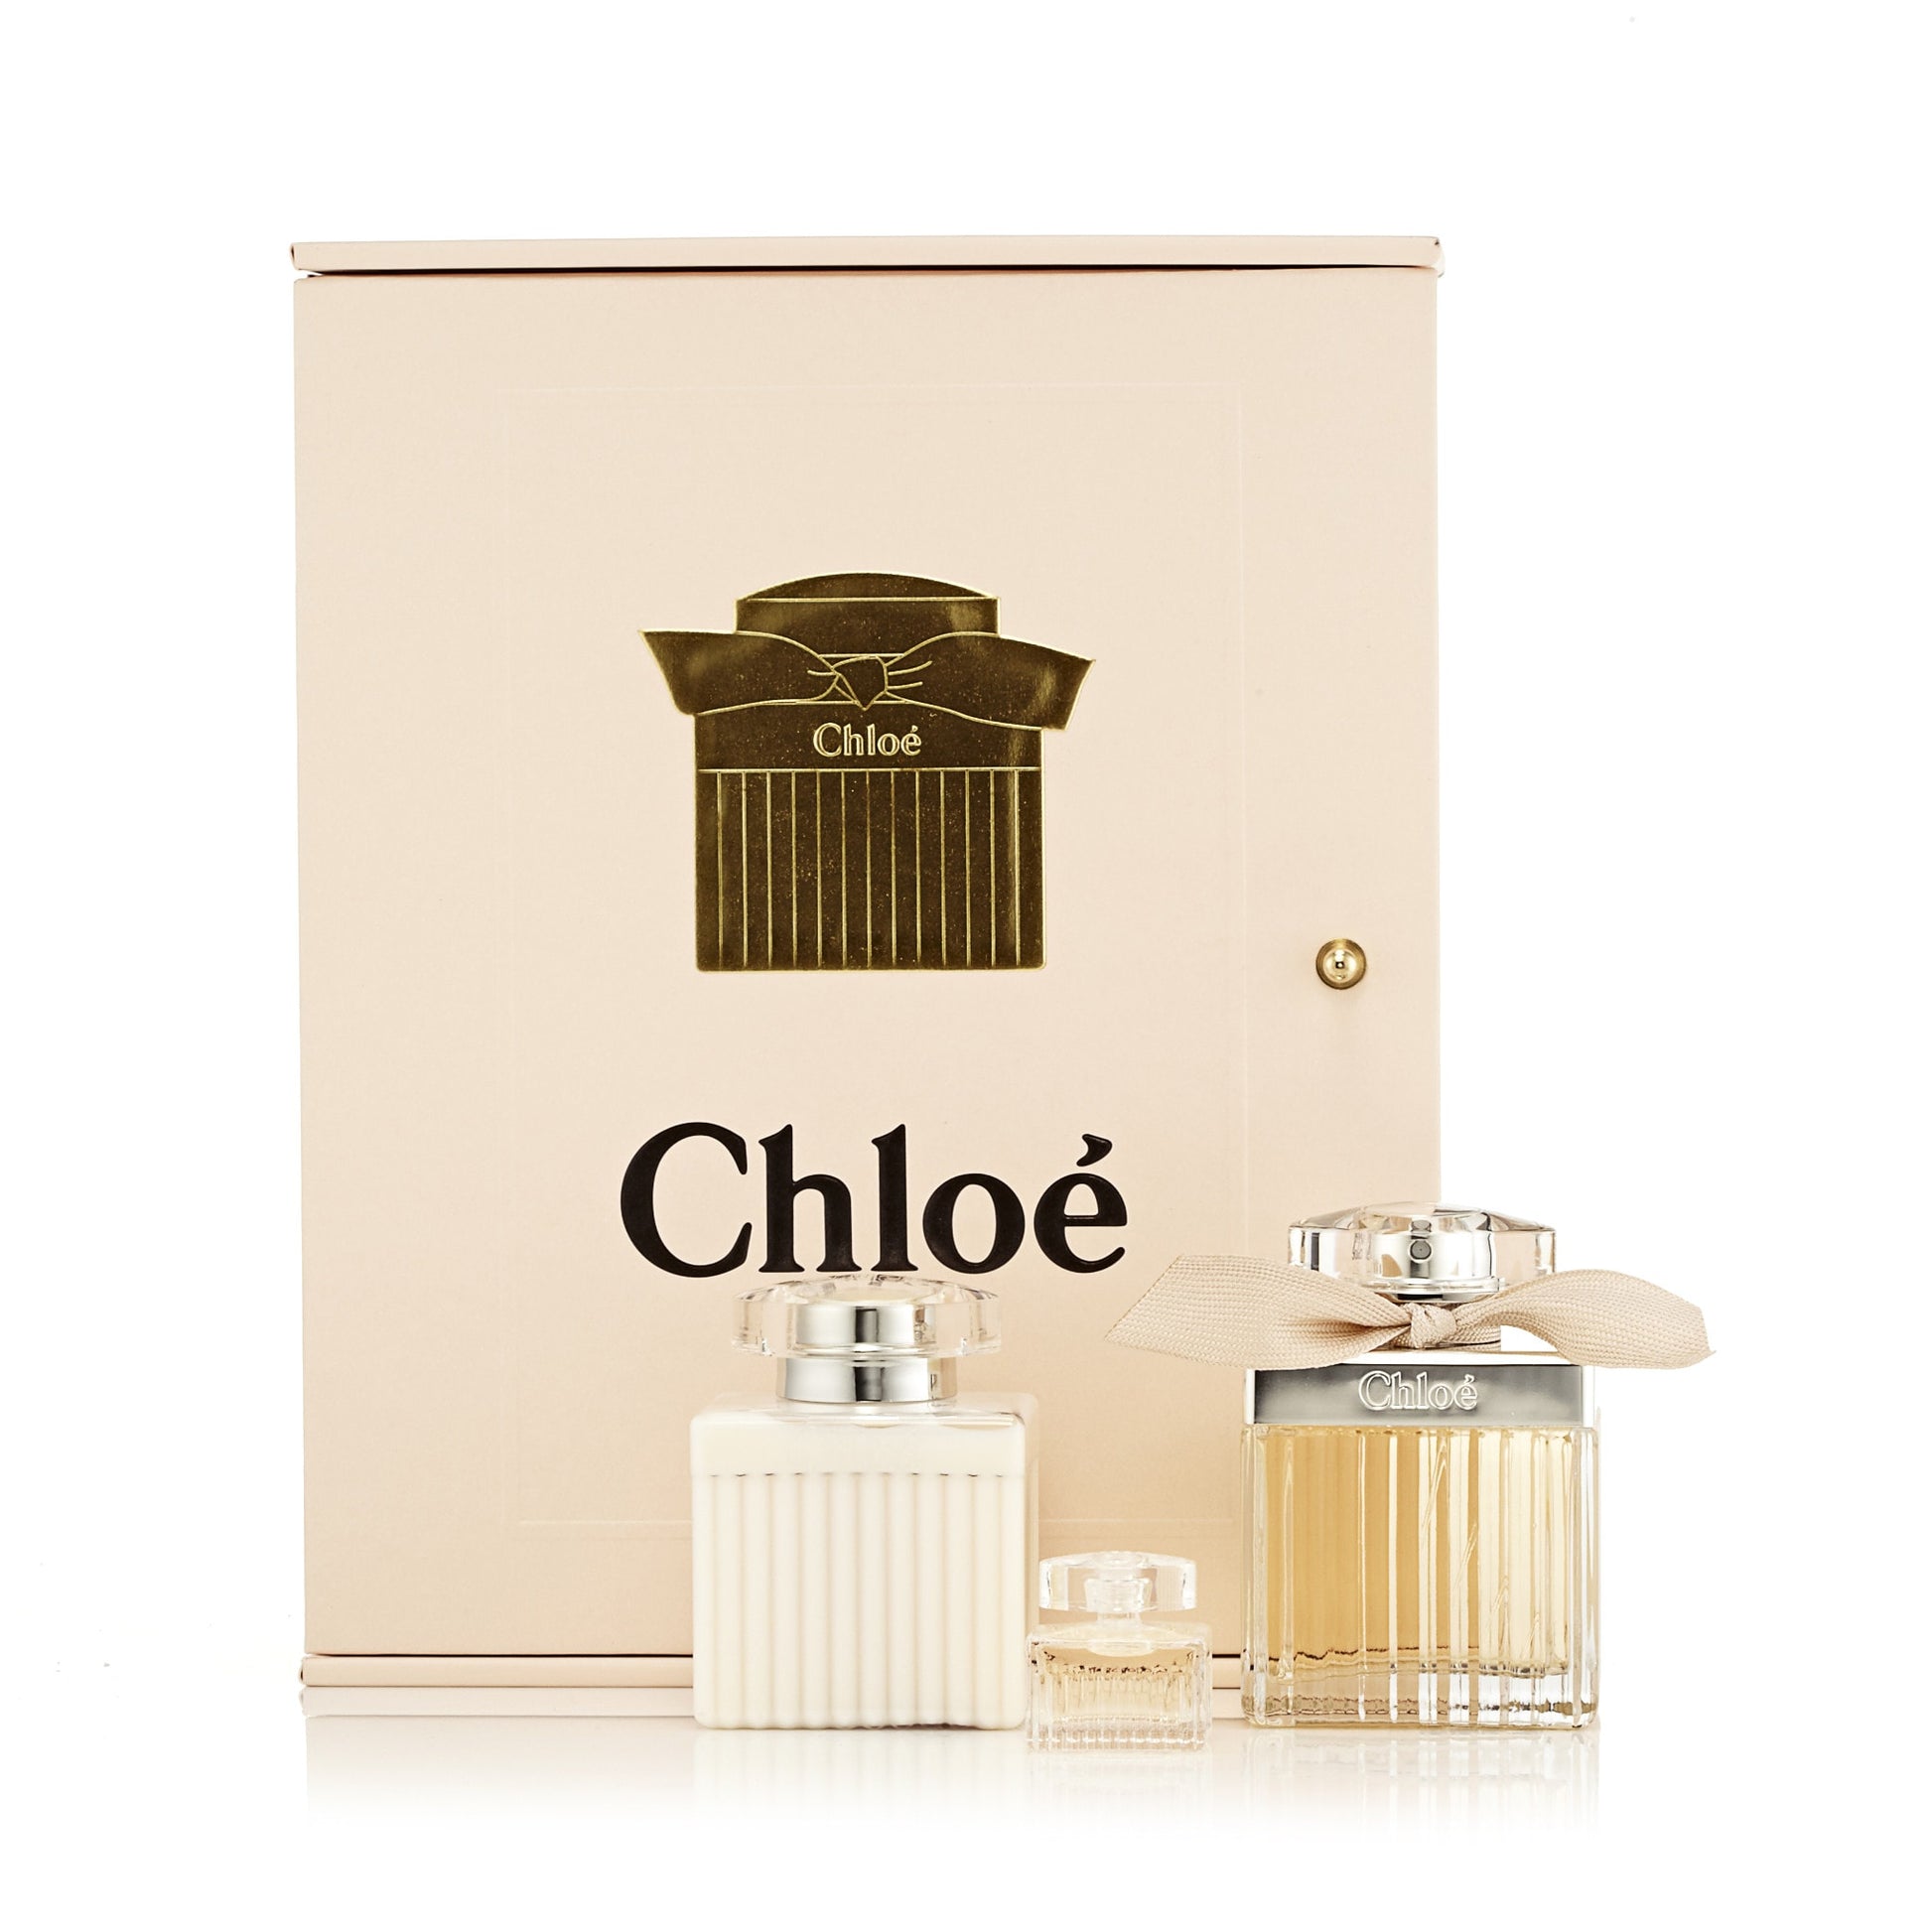 Chloe Gift Set for Women by Chloe, Product image 2